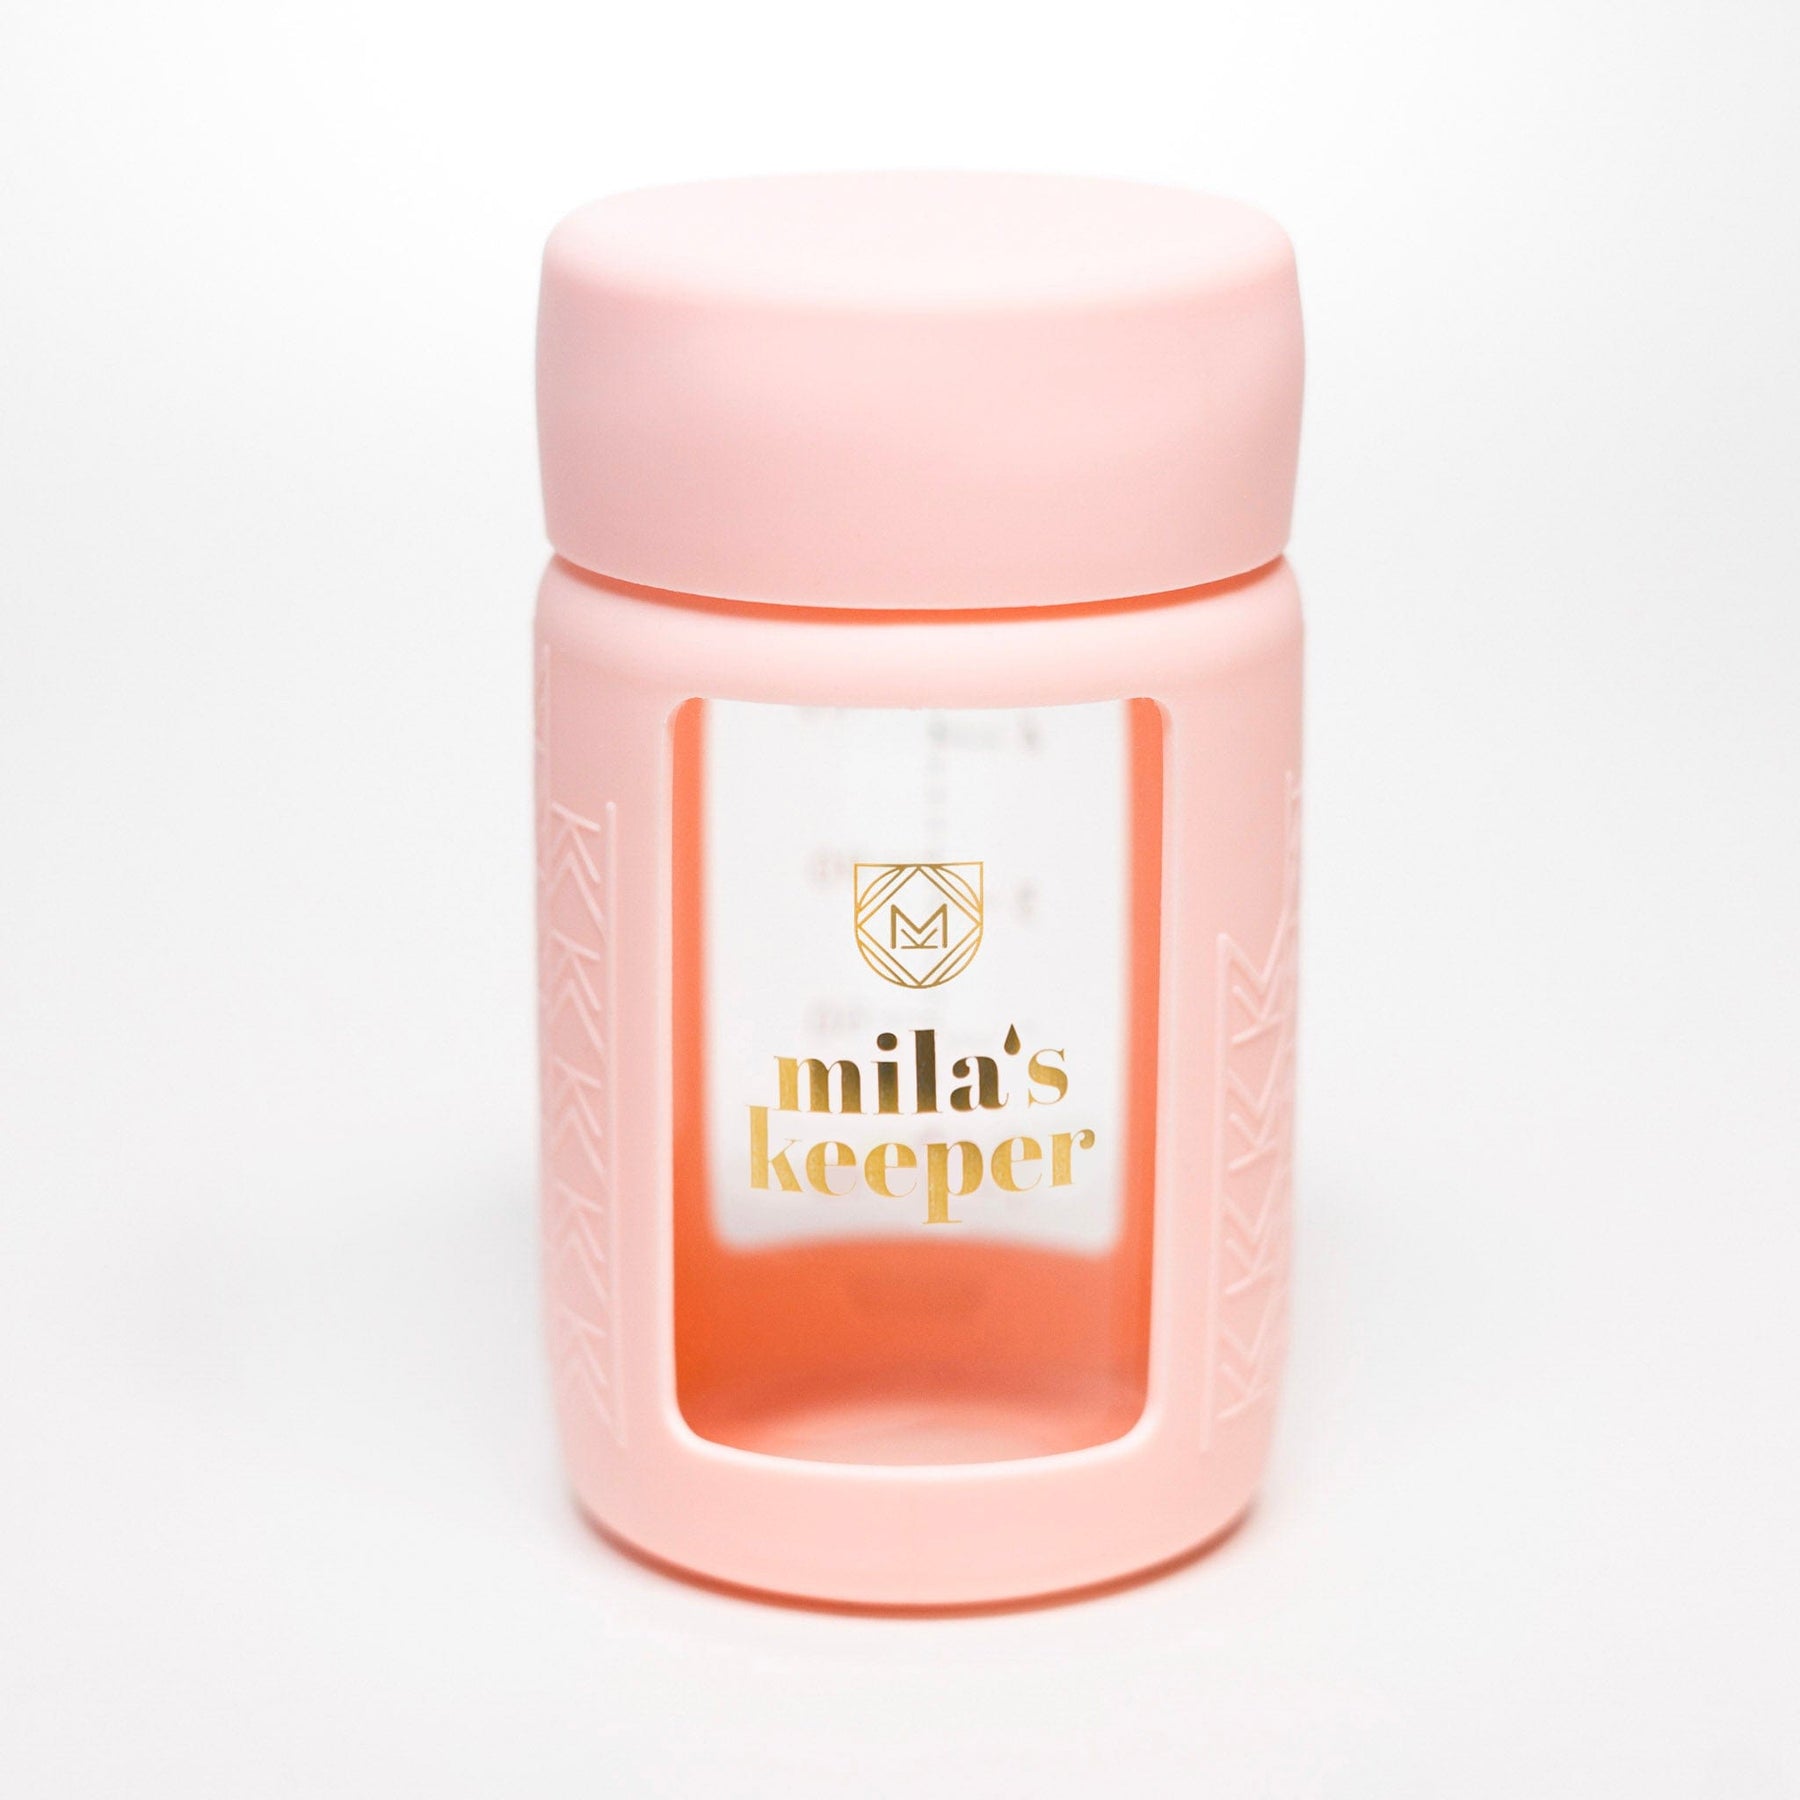 Mila's Keeper Breast Milk Storage Containers Wide Neck / Pink Sands Glass Breast Milk Storage Bottles for-on-the-go-cold-storage-and-pumping